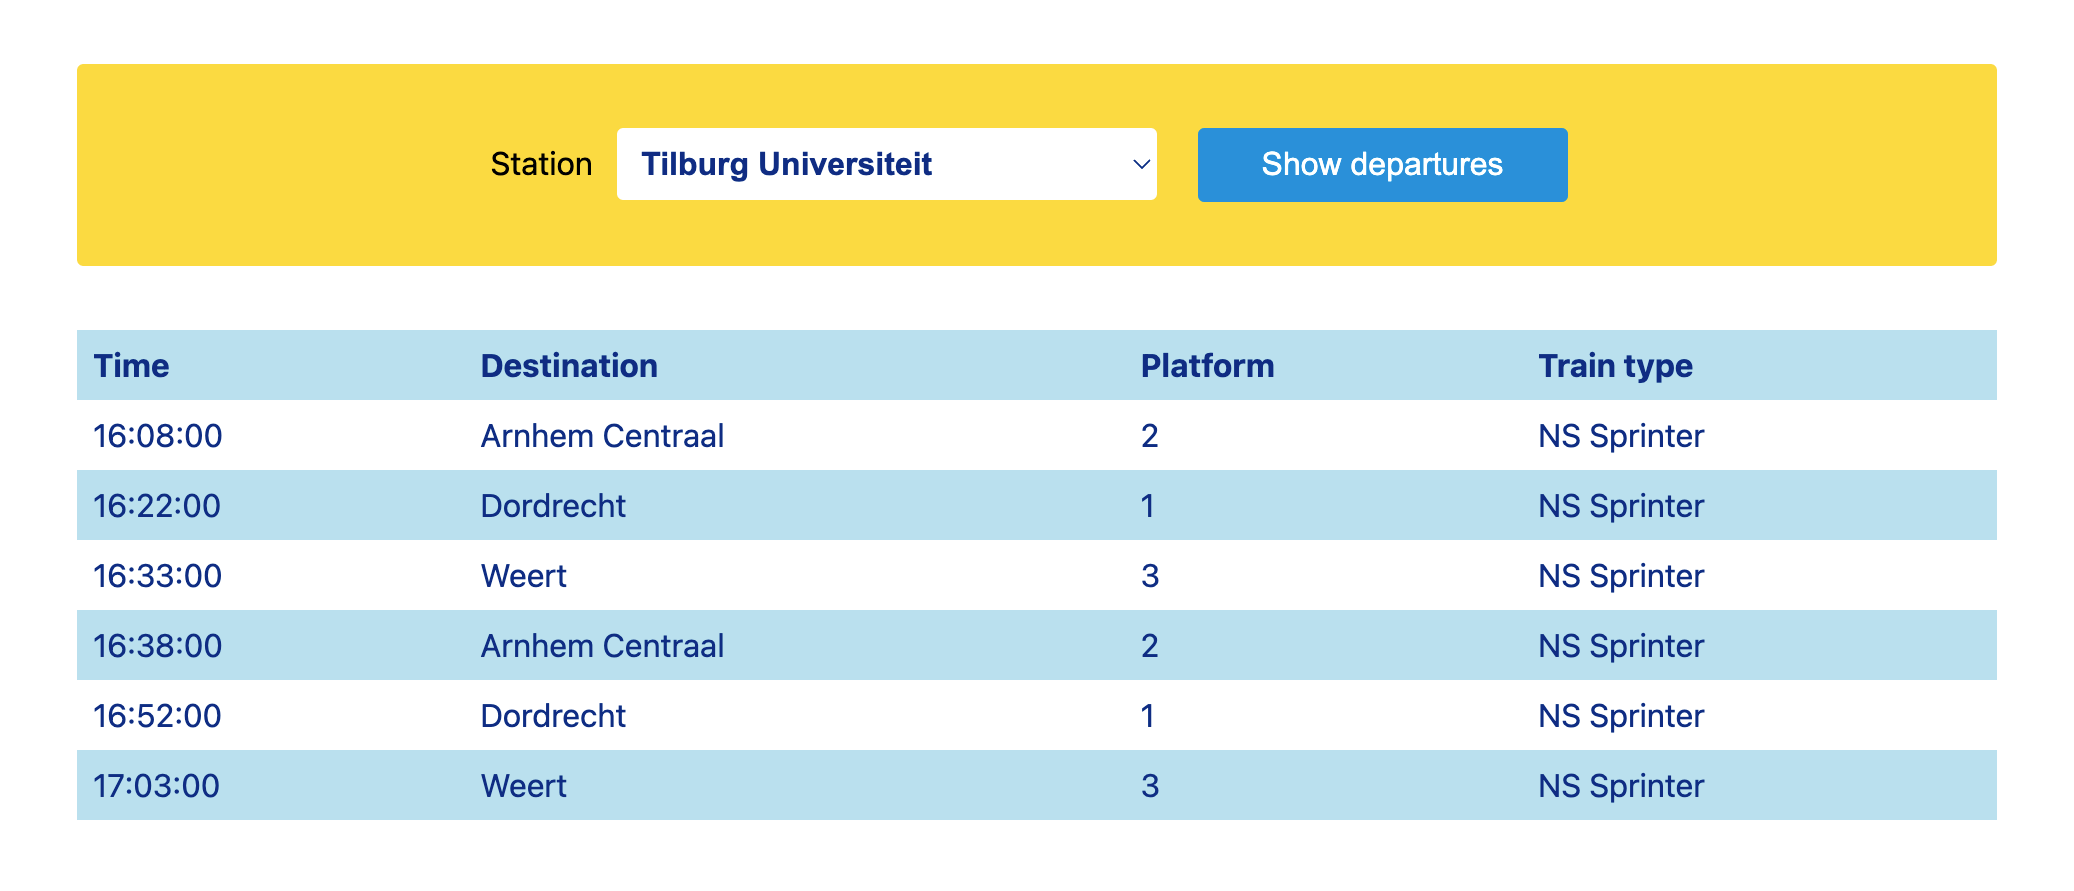 A page that shows all trains that depart from Tilburg University
station within the next hour.